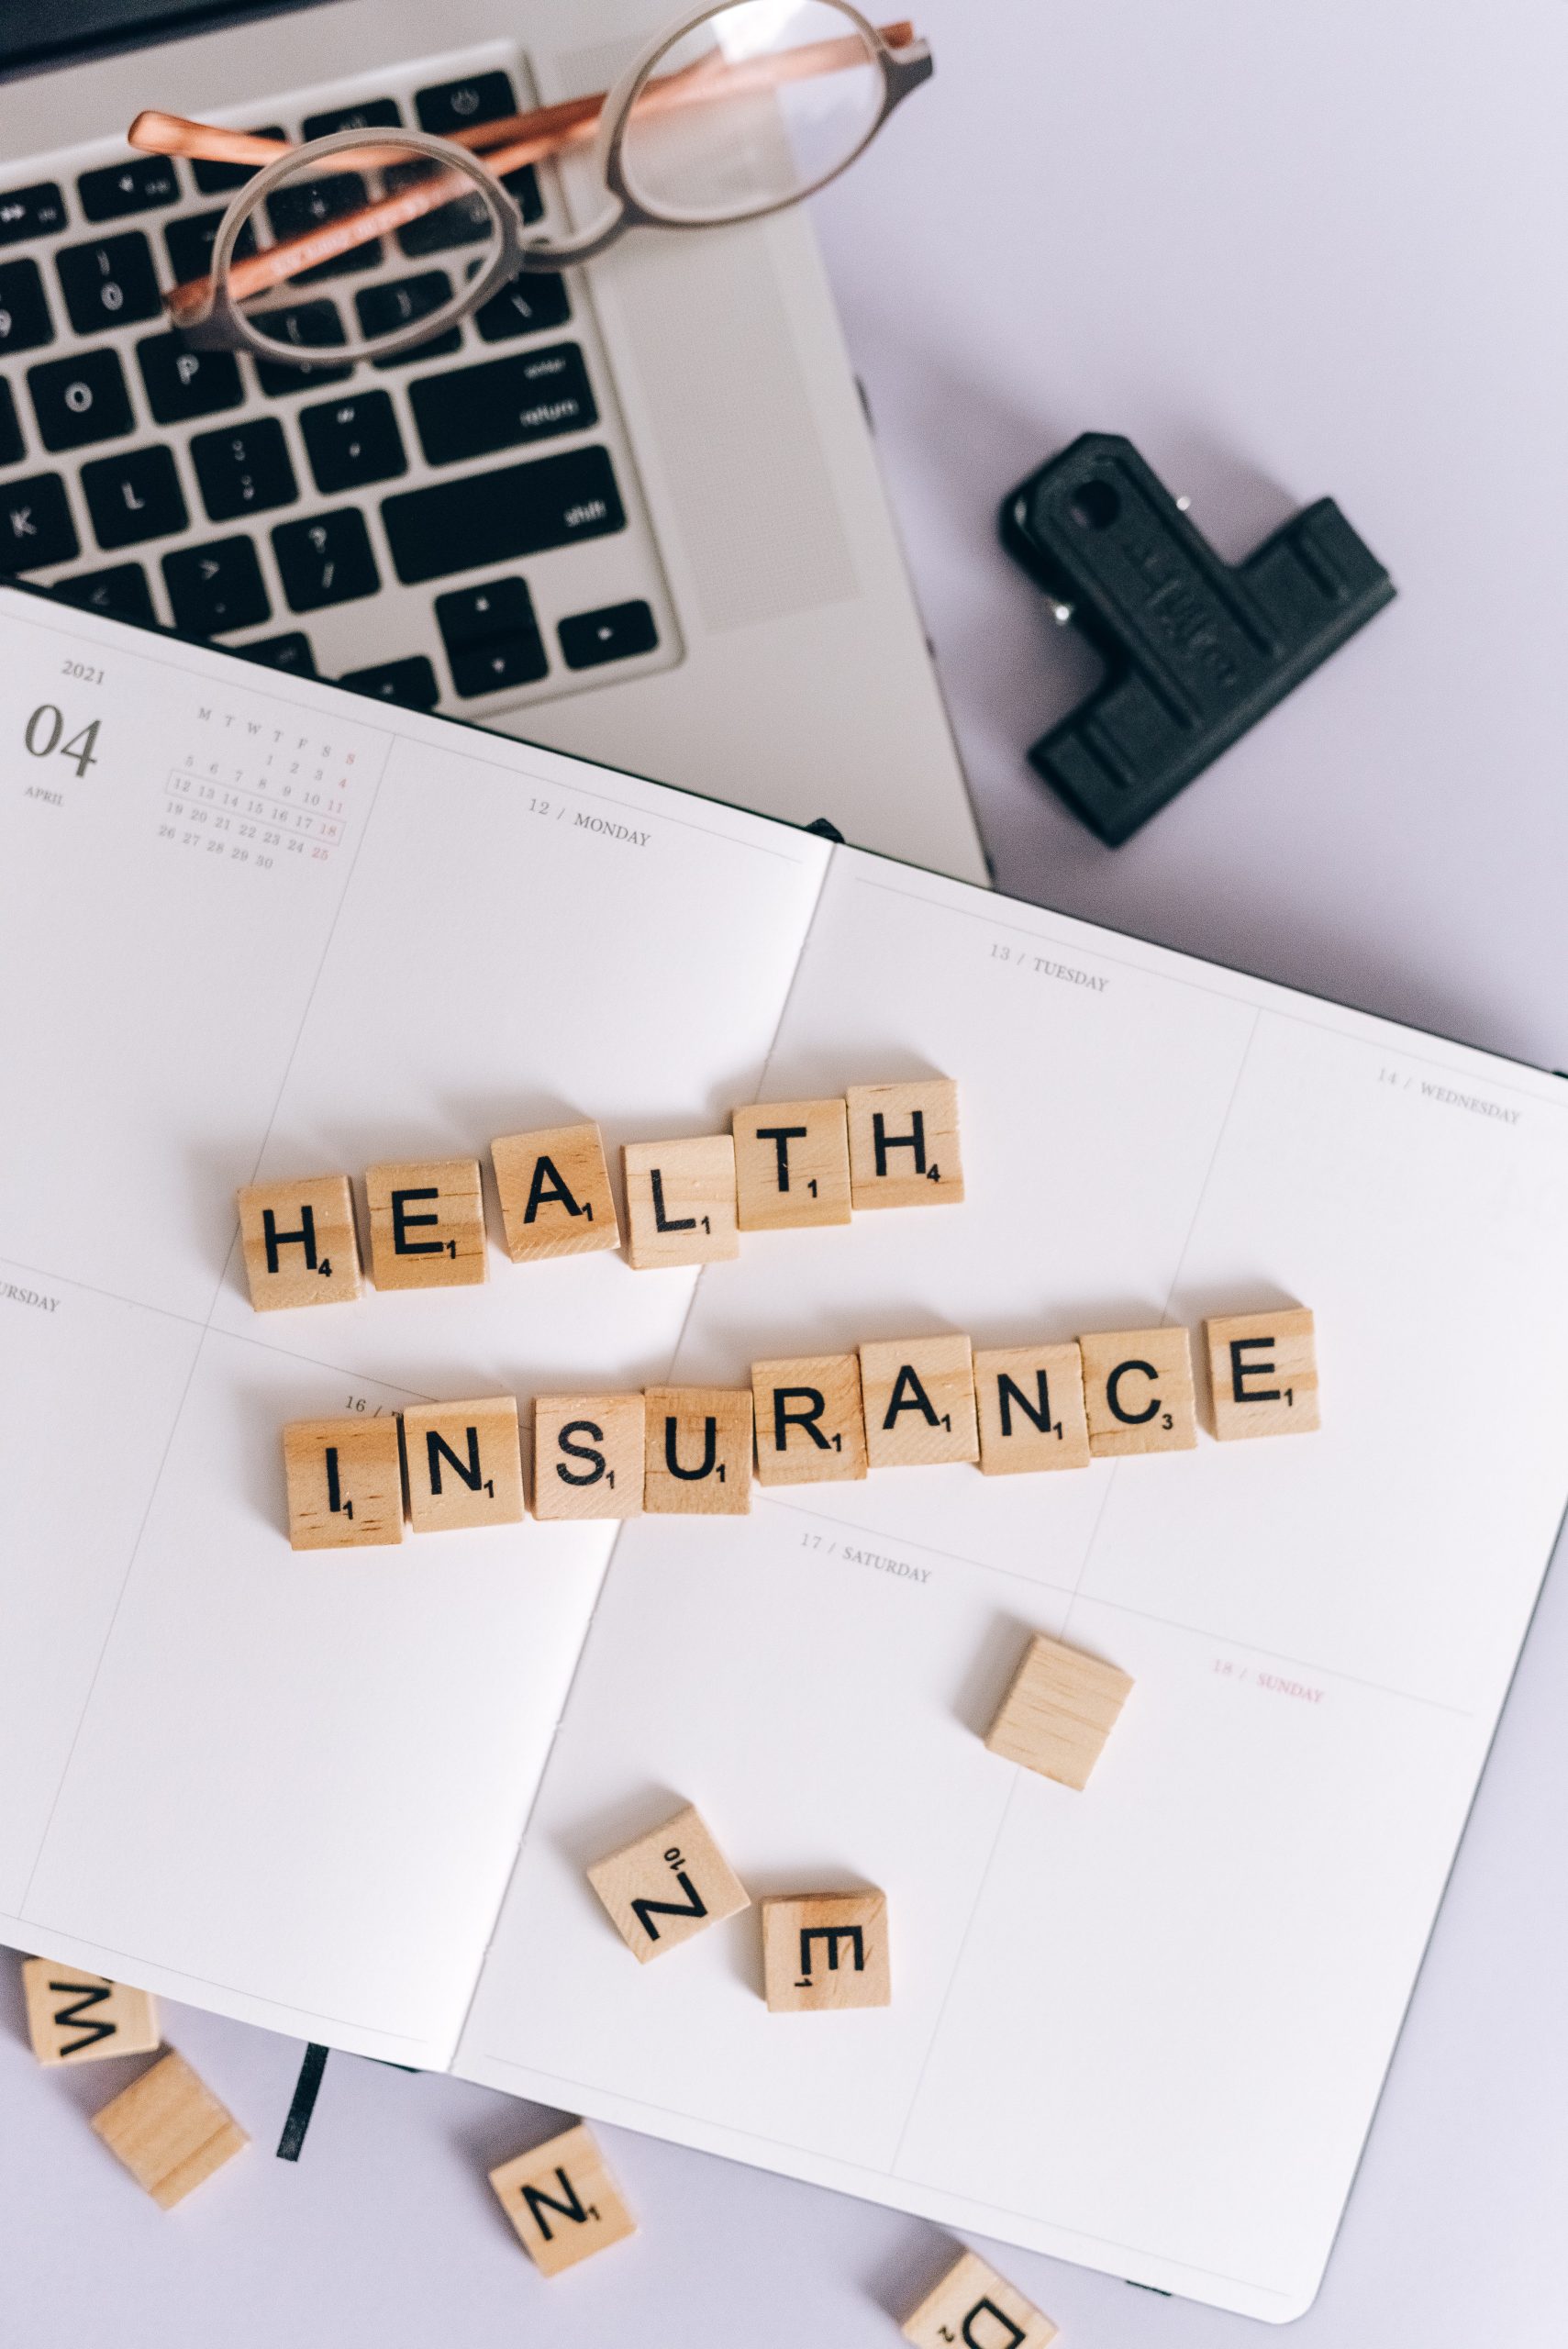 A daily planner is open on a laptop on a table with scattered Scrabble tiles. Some of the Scrabble tiles spell out "Health Insurance".